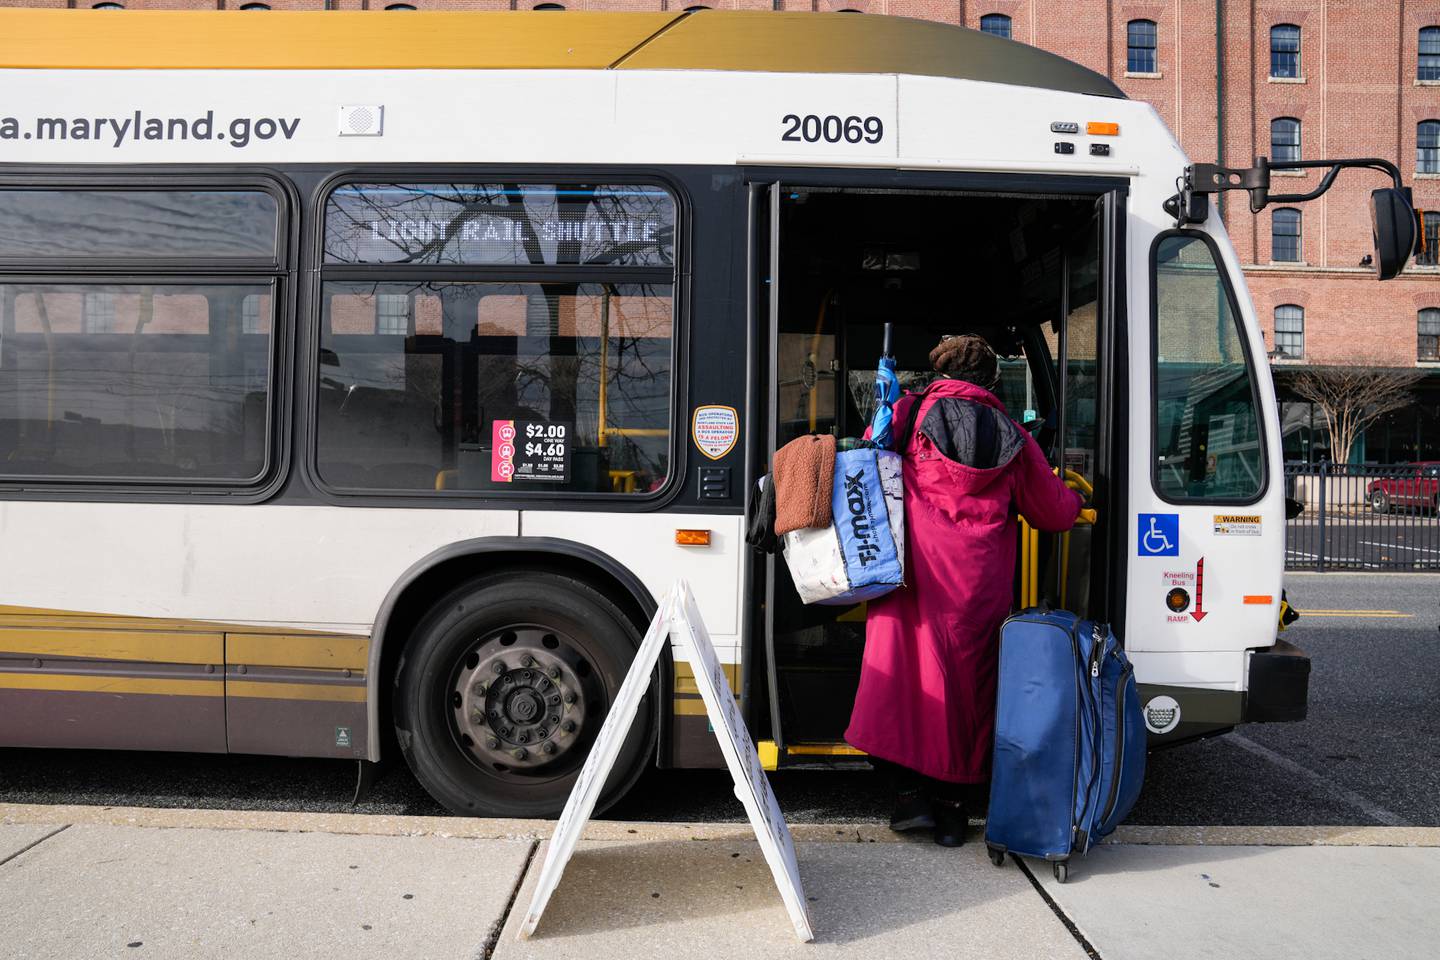 Wanda, a resident of the Baltimore area, boards a northbound light rail shuttle bus on Friday, Dec. 8, 2023. She often uses the light rail services and learned that it was down when she heard the announcement on the platform.